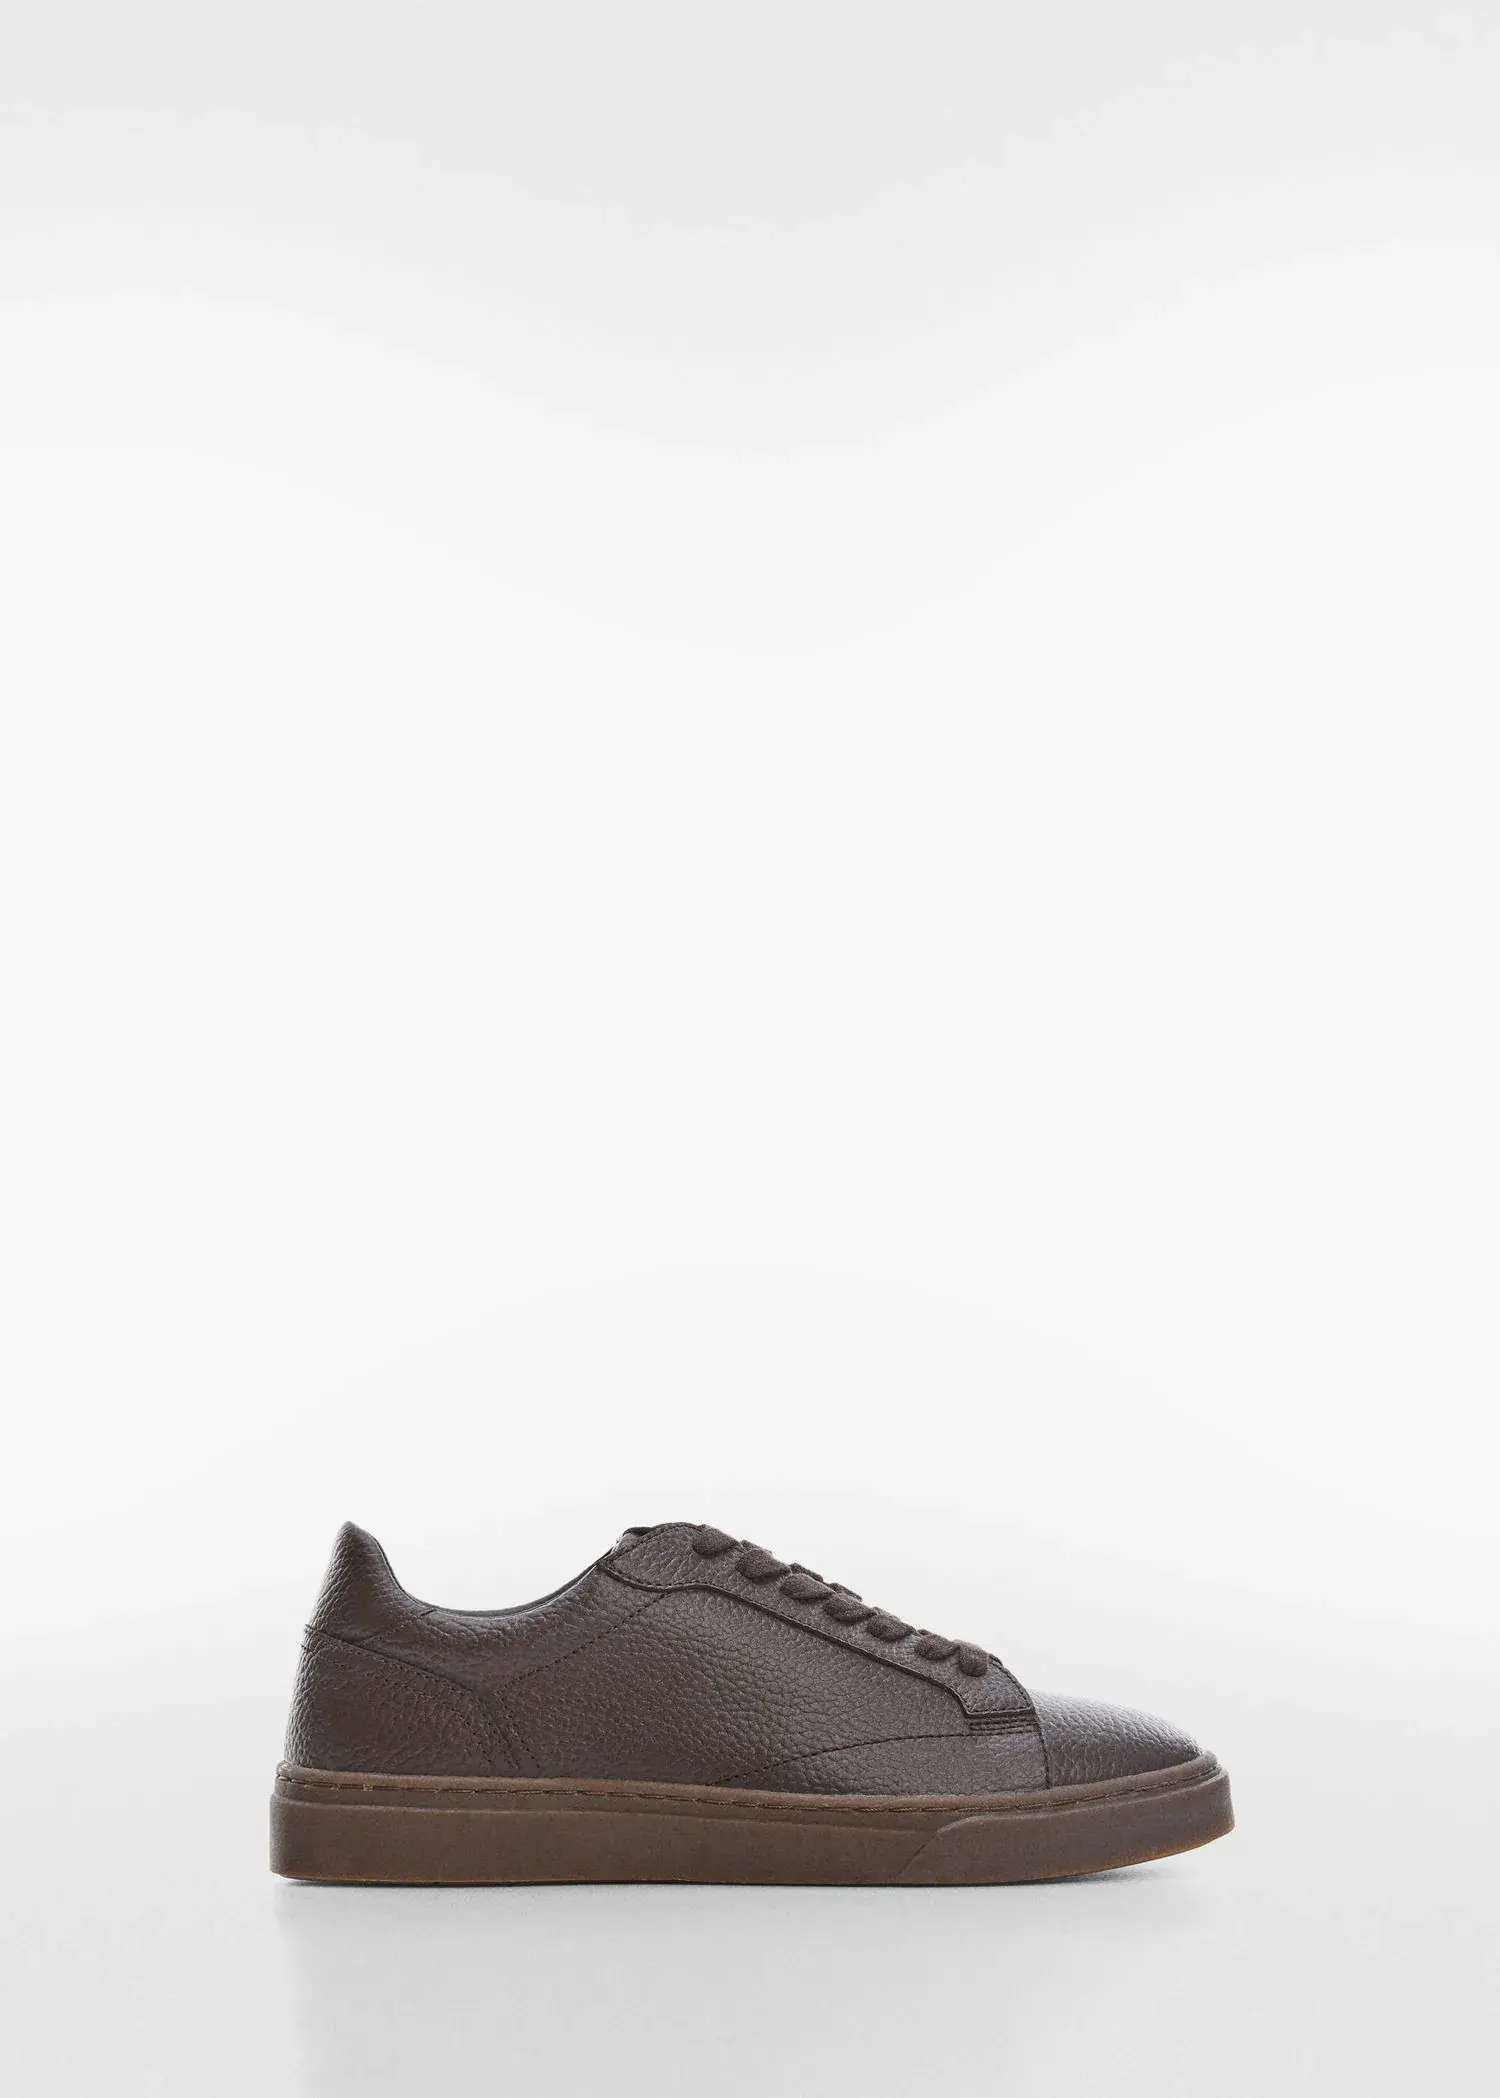 Mango Pebbled leather sneakers. a pair of brown shoes on a white background. 